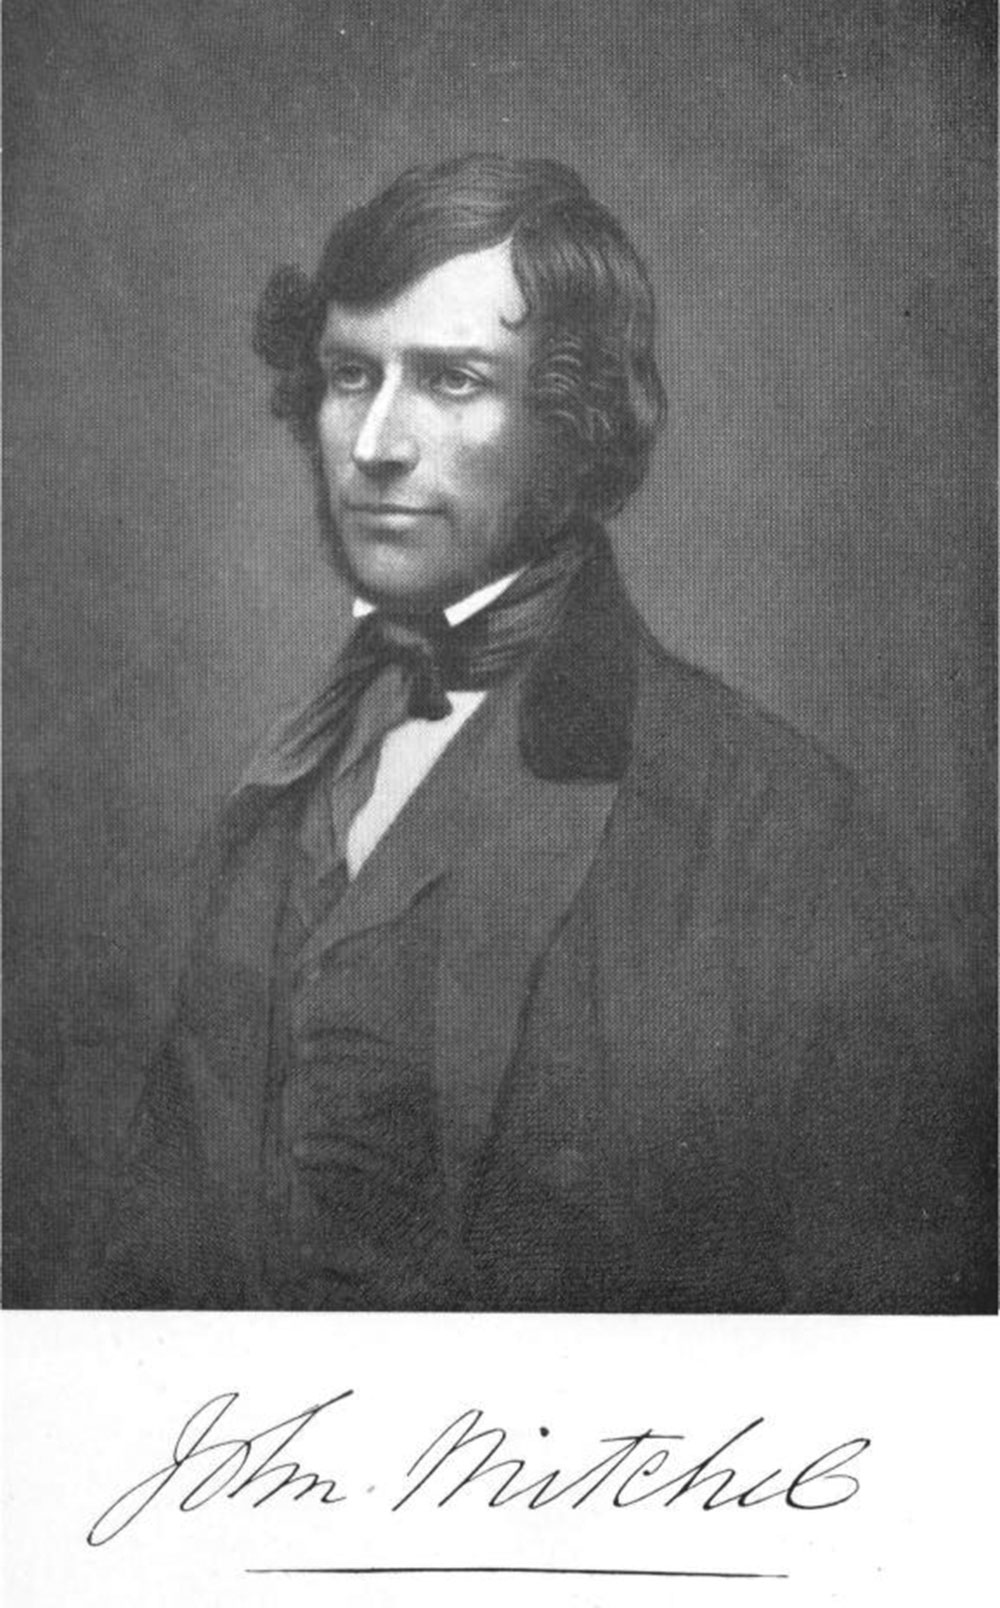 John Mitchel, a  leading member of the Young Ireland movement.